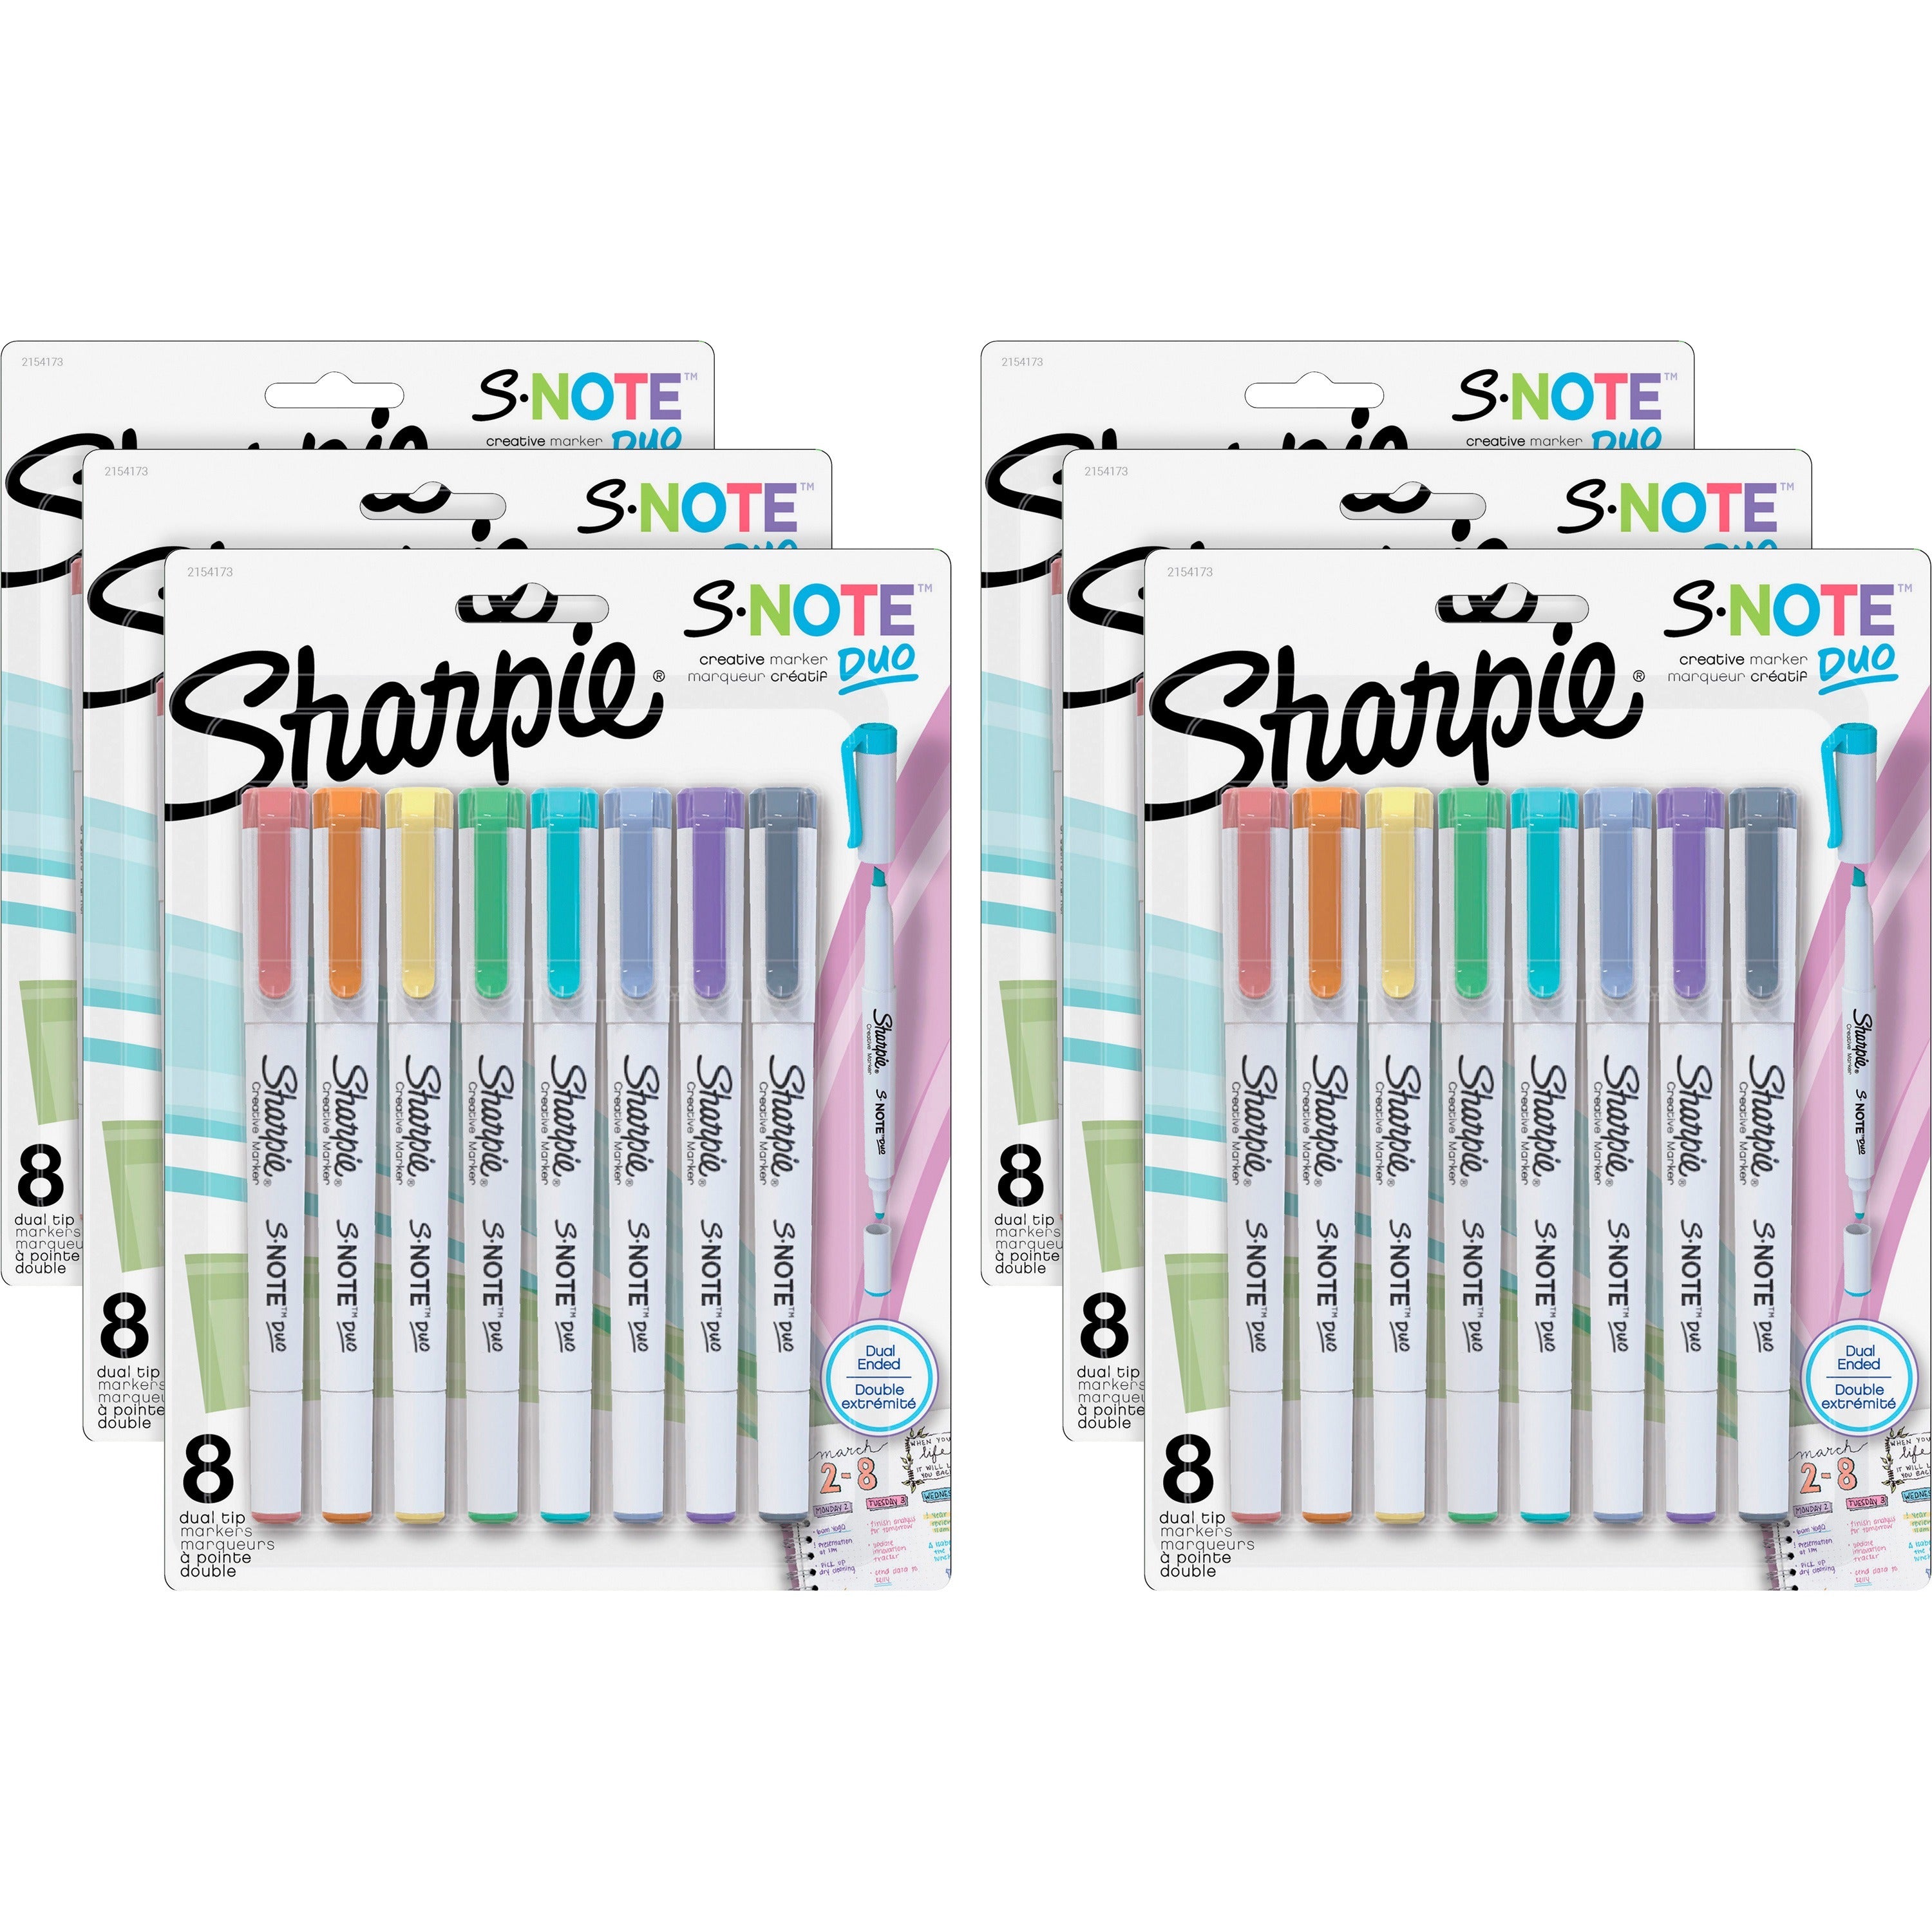 sharpie-s-note-duo-dual-tip-markers-chisel-bullet-marker-point-style-assorted-6-box_san2154173bx - 1